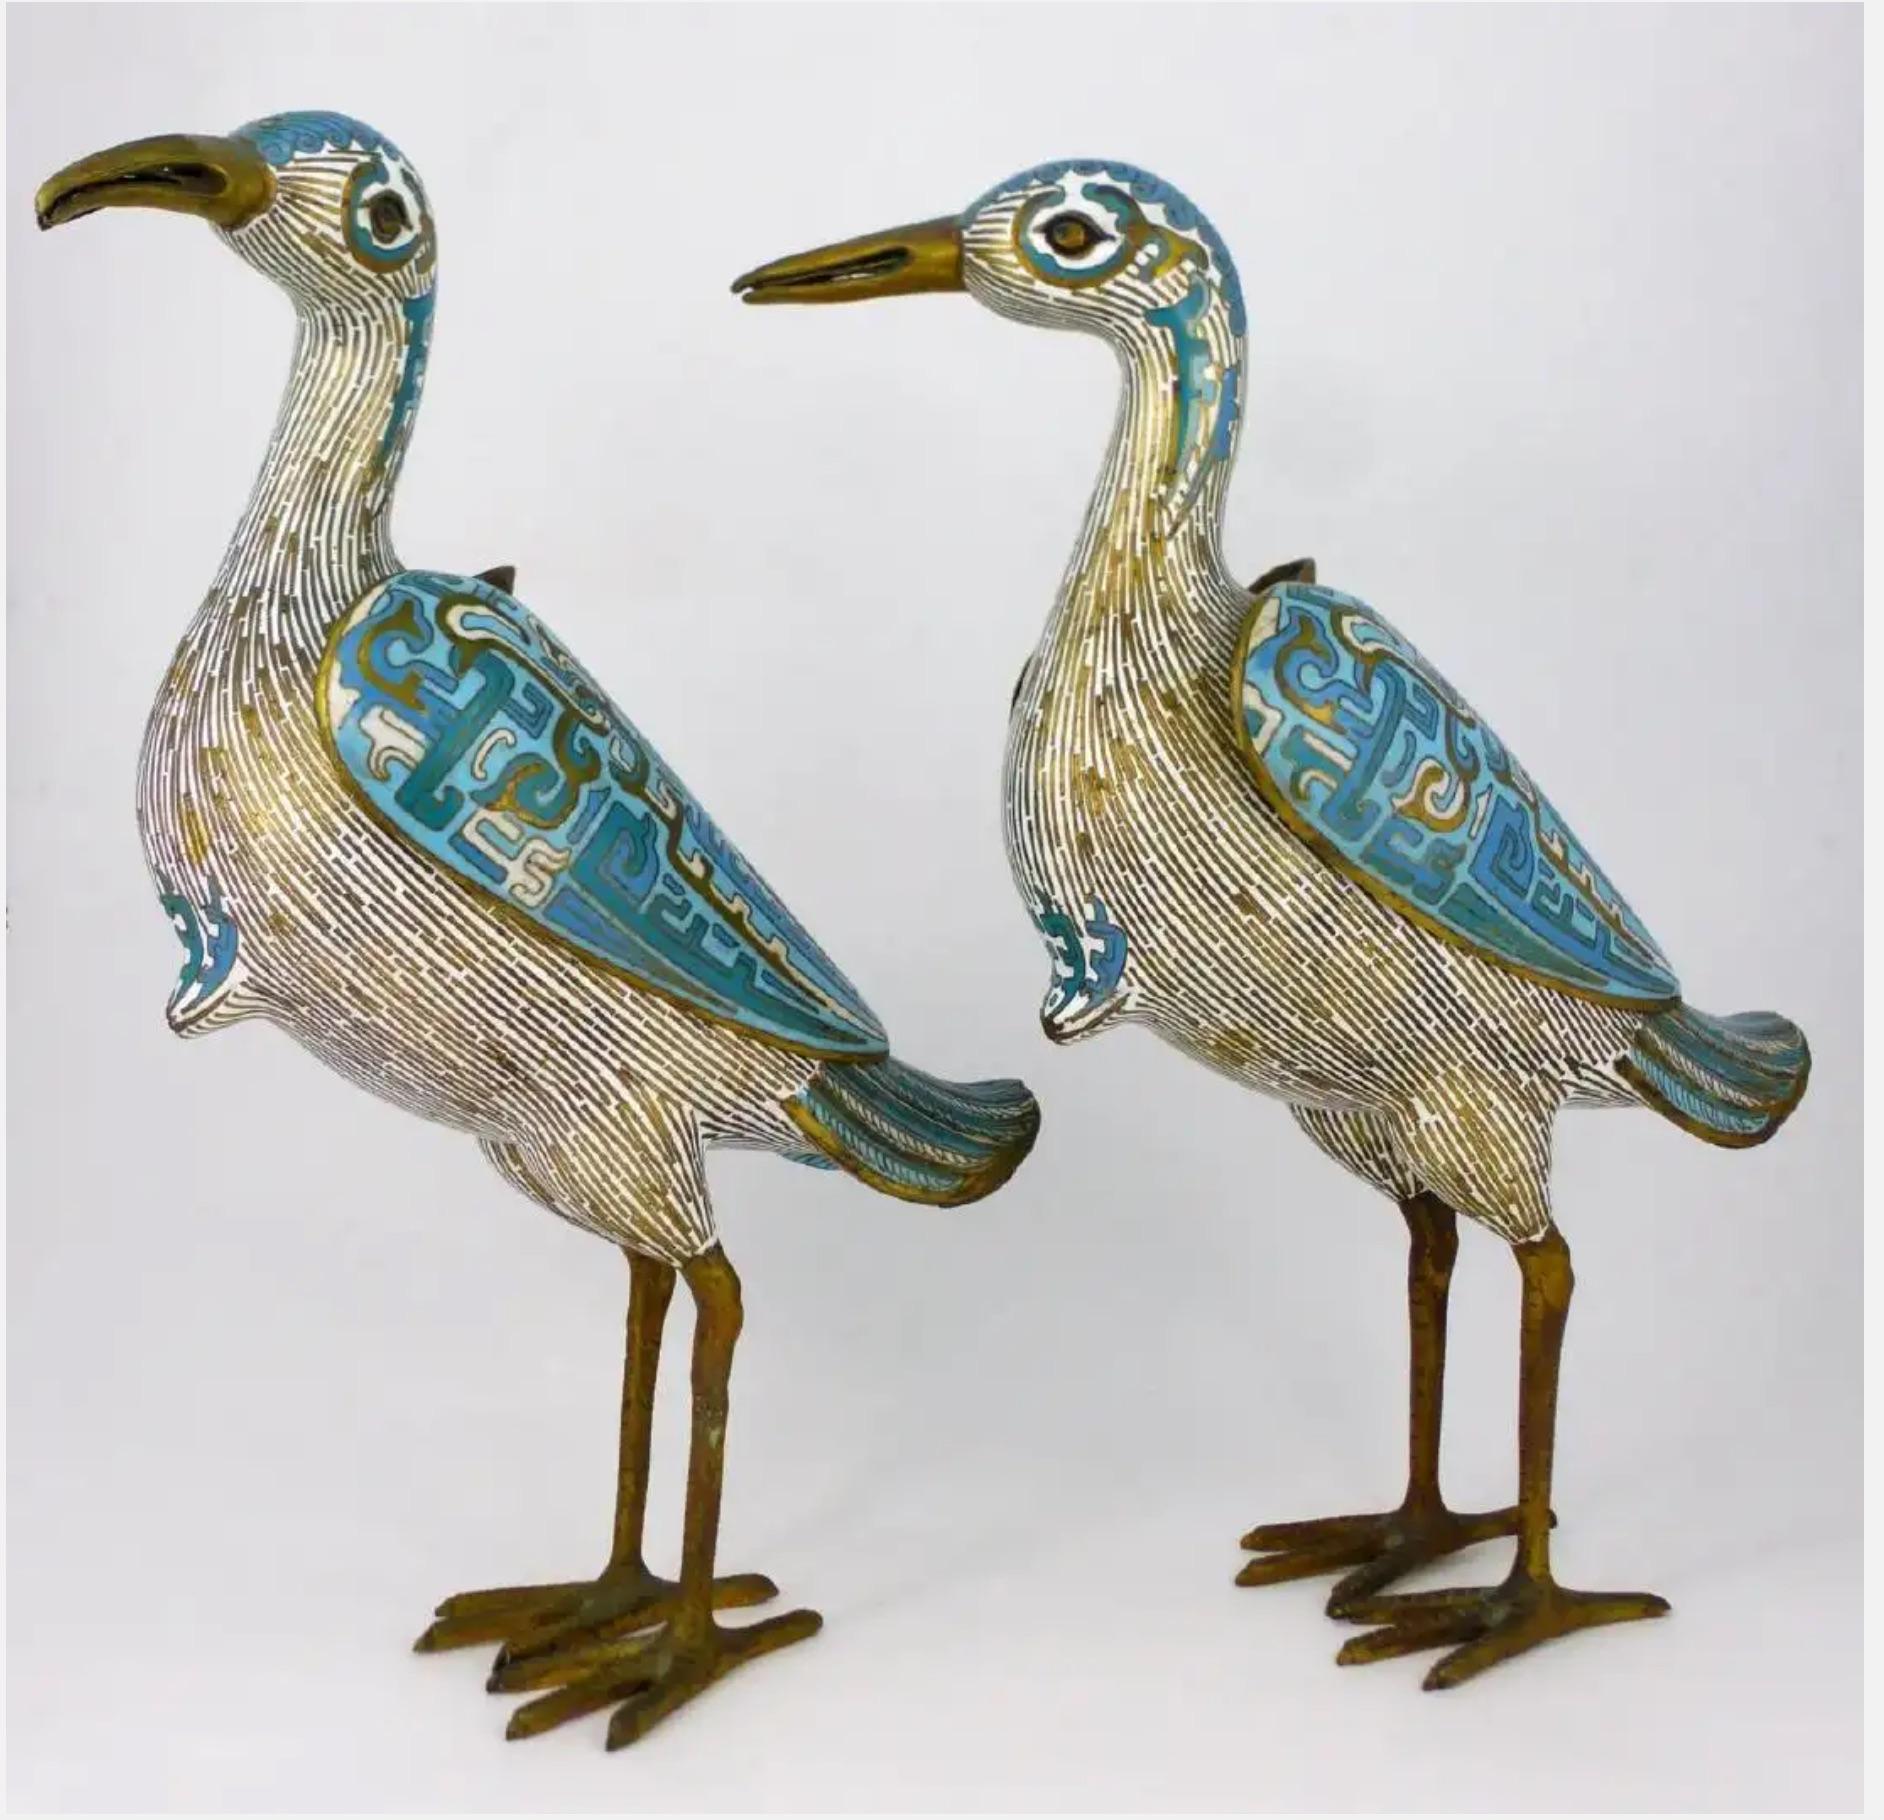 Gorgeous inspired large pair of Chinese cloisonné bird form vessels.
Lovely design and coloration make a lovely Connoisseur accent in any decor.
The wings can be removed to expose an opening, possibly to hold something secret and safe.
Measures: